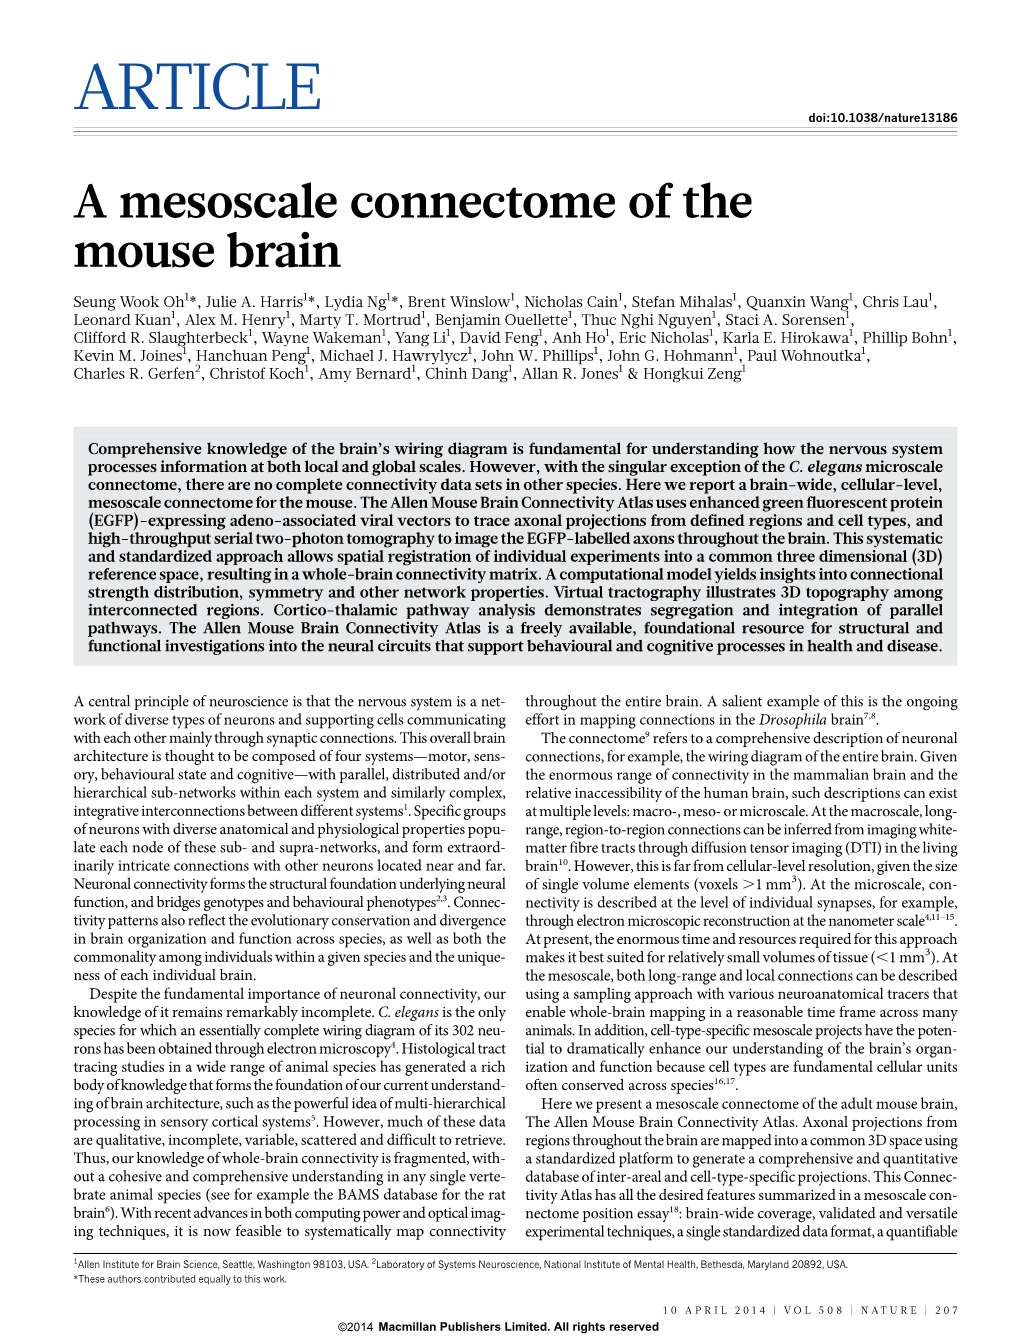 A Mesoscale Connectome of the Mouse Brain